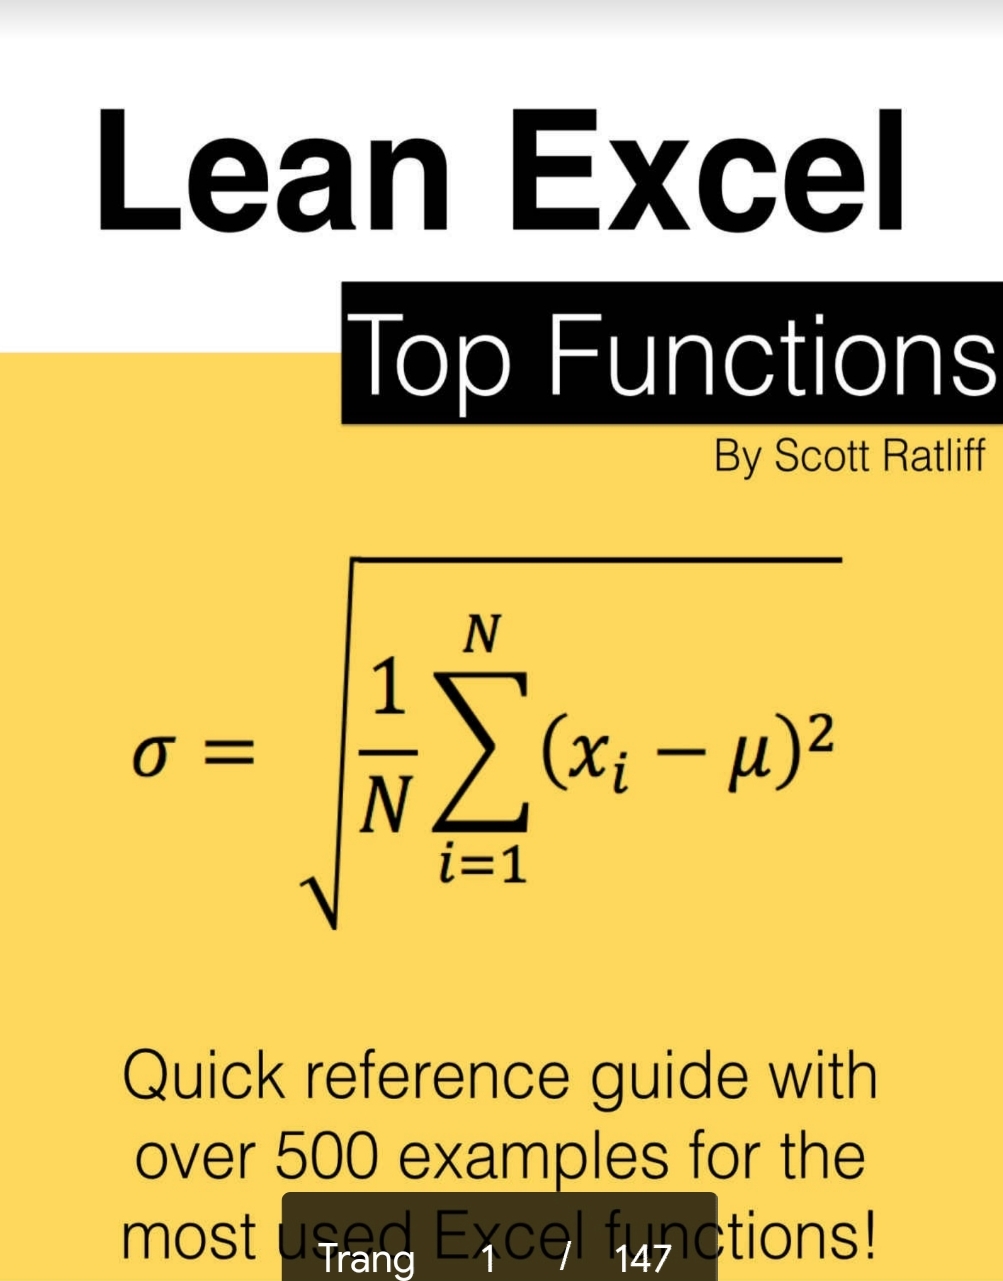 Lean Excel Top Functions Quick Reference Guide with 500 Examples